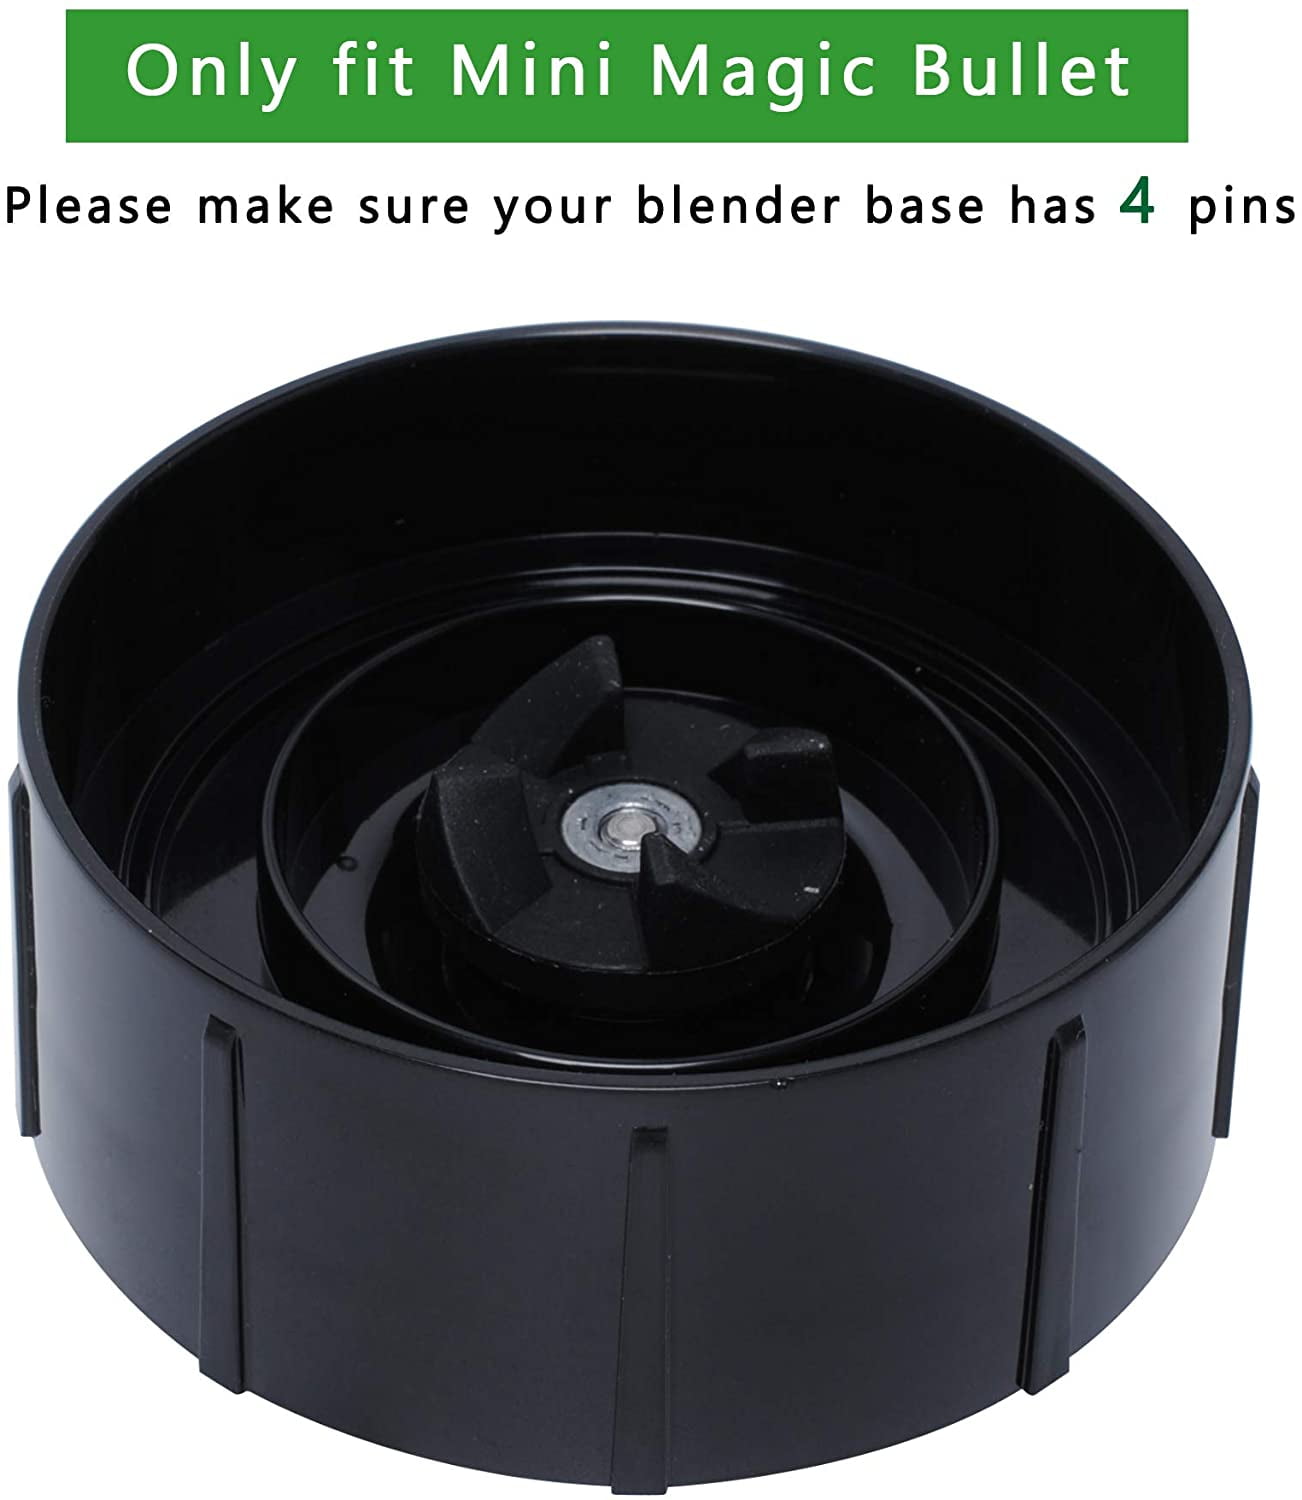 GahsElec 250W Replacement Blades and Gaskets for Magic Bullet Blender, Black